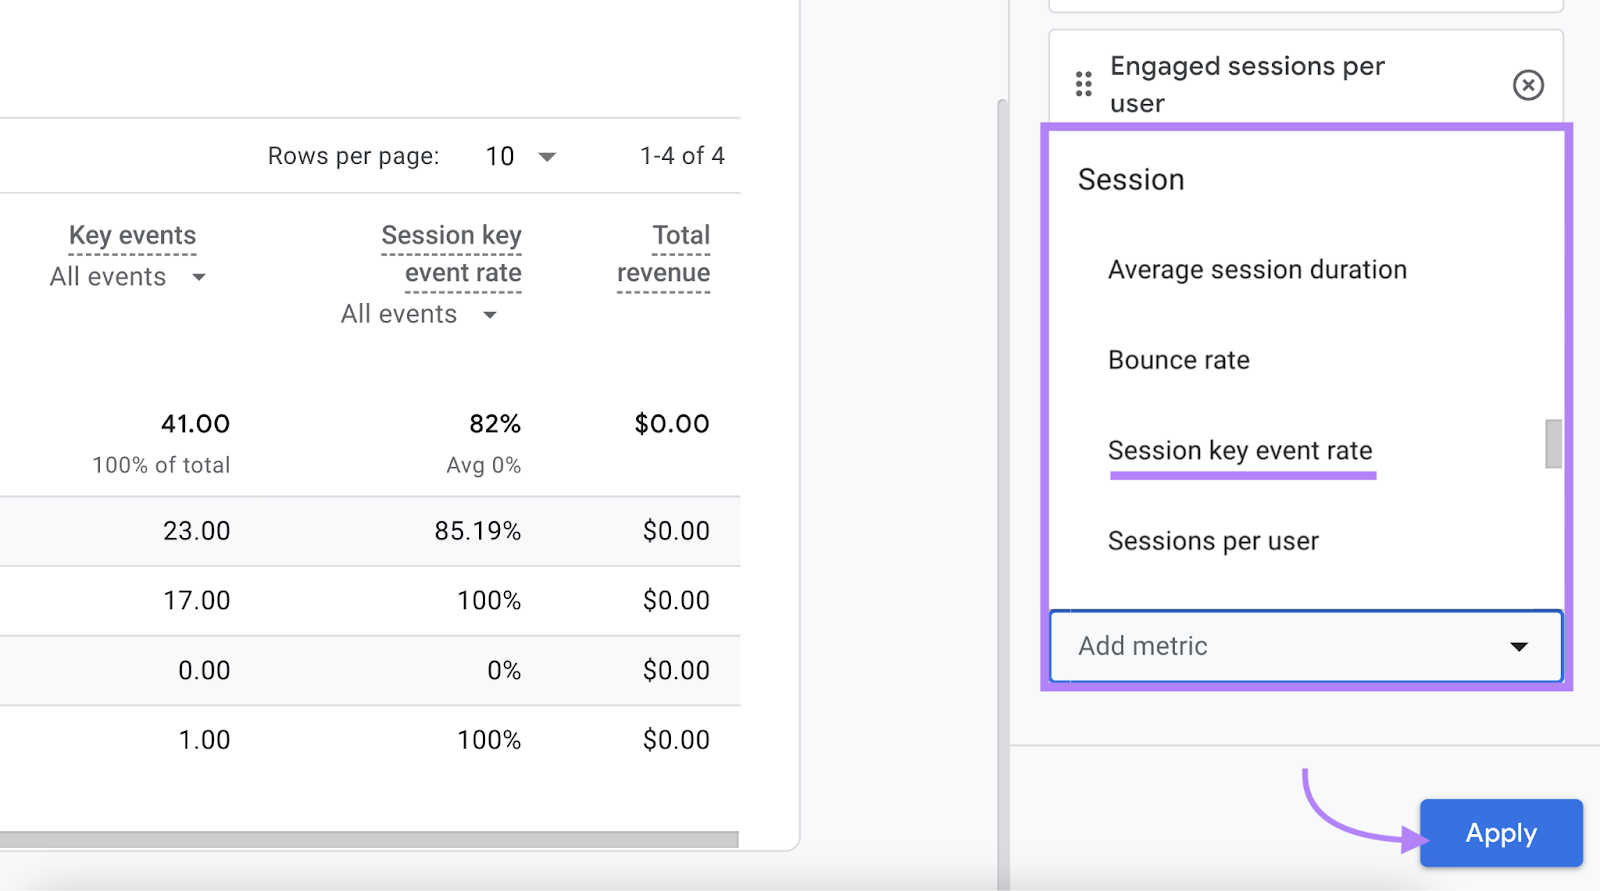 Session key event rate option highlighted. Apply button also highlighted.